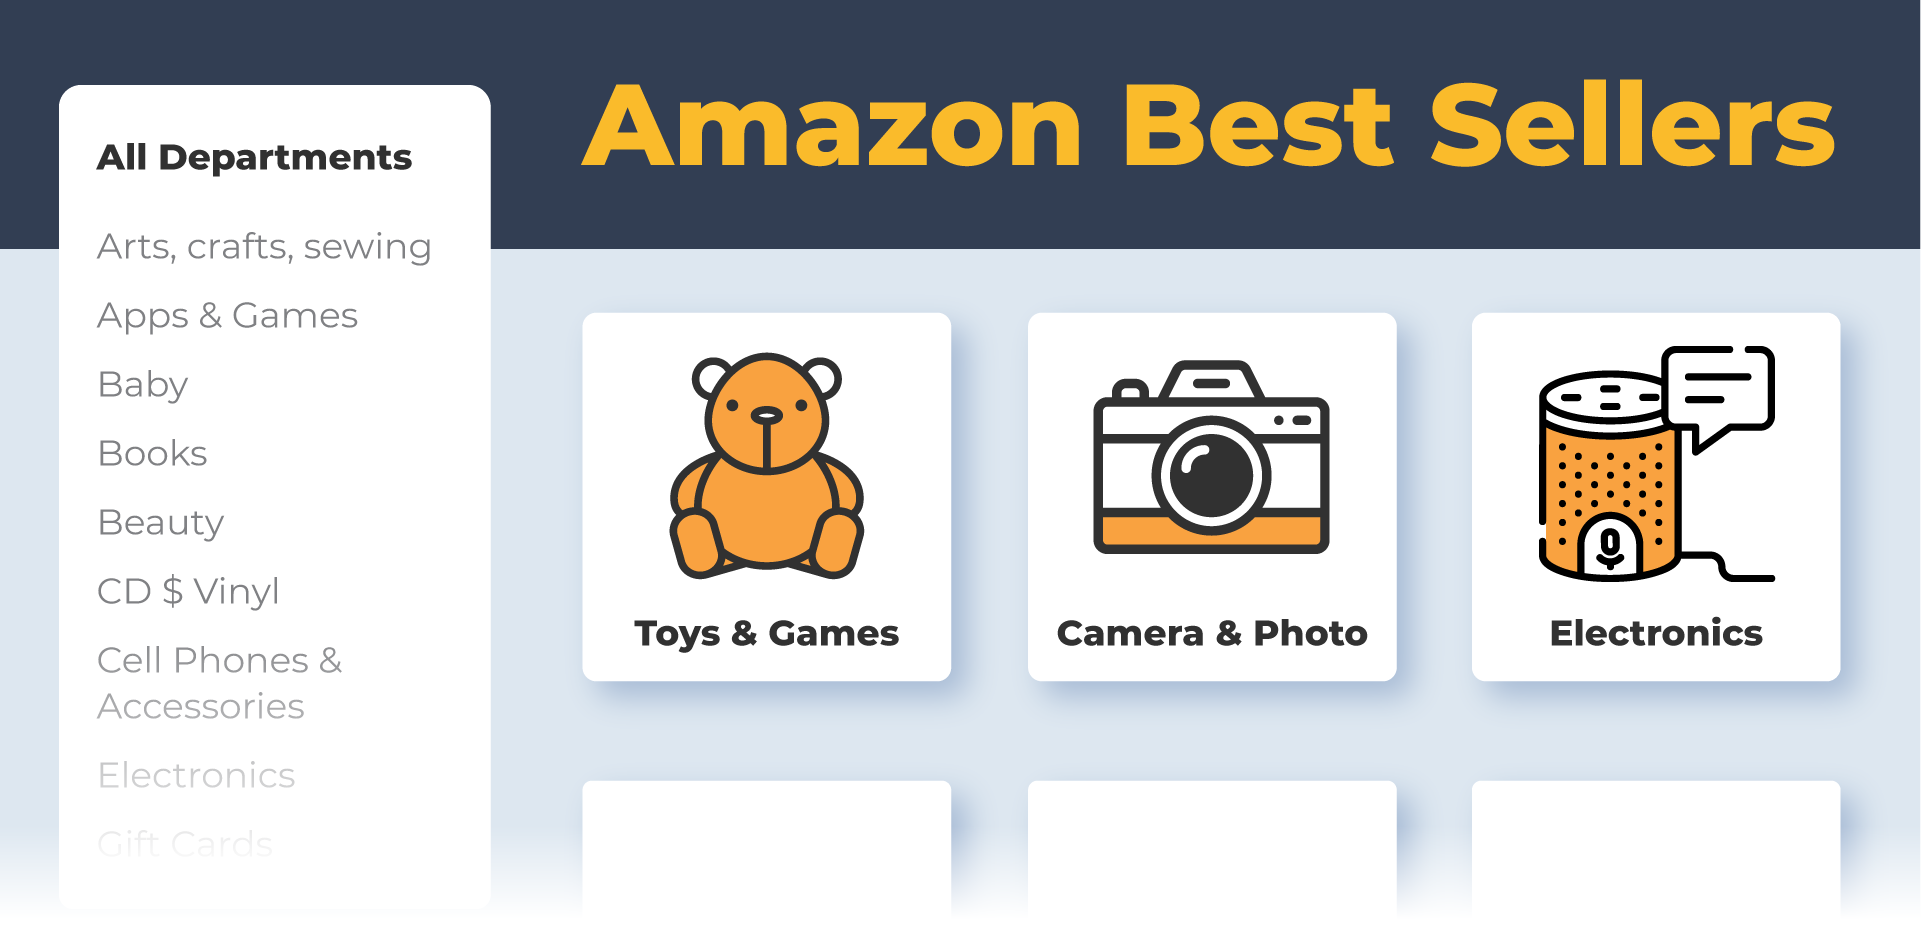 Guide about top selling items on Amazon fba Techodrom